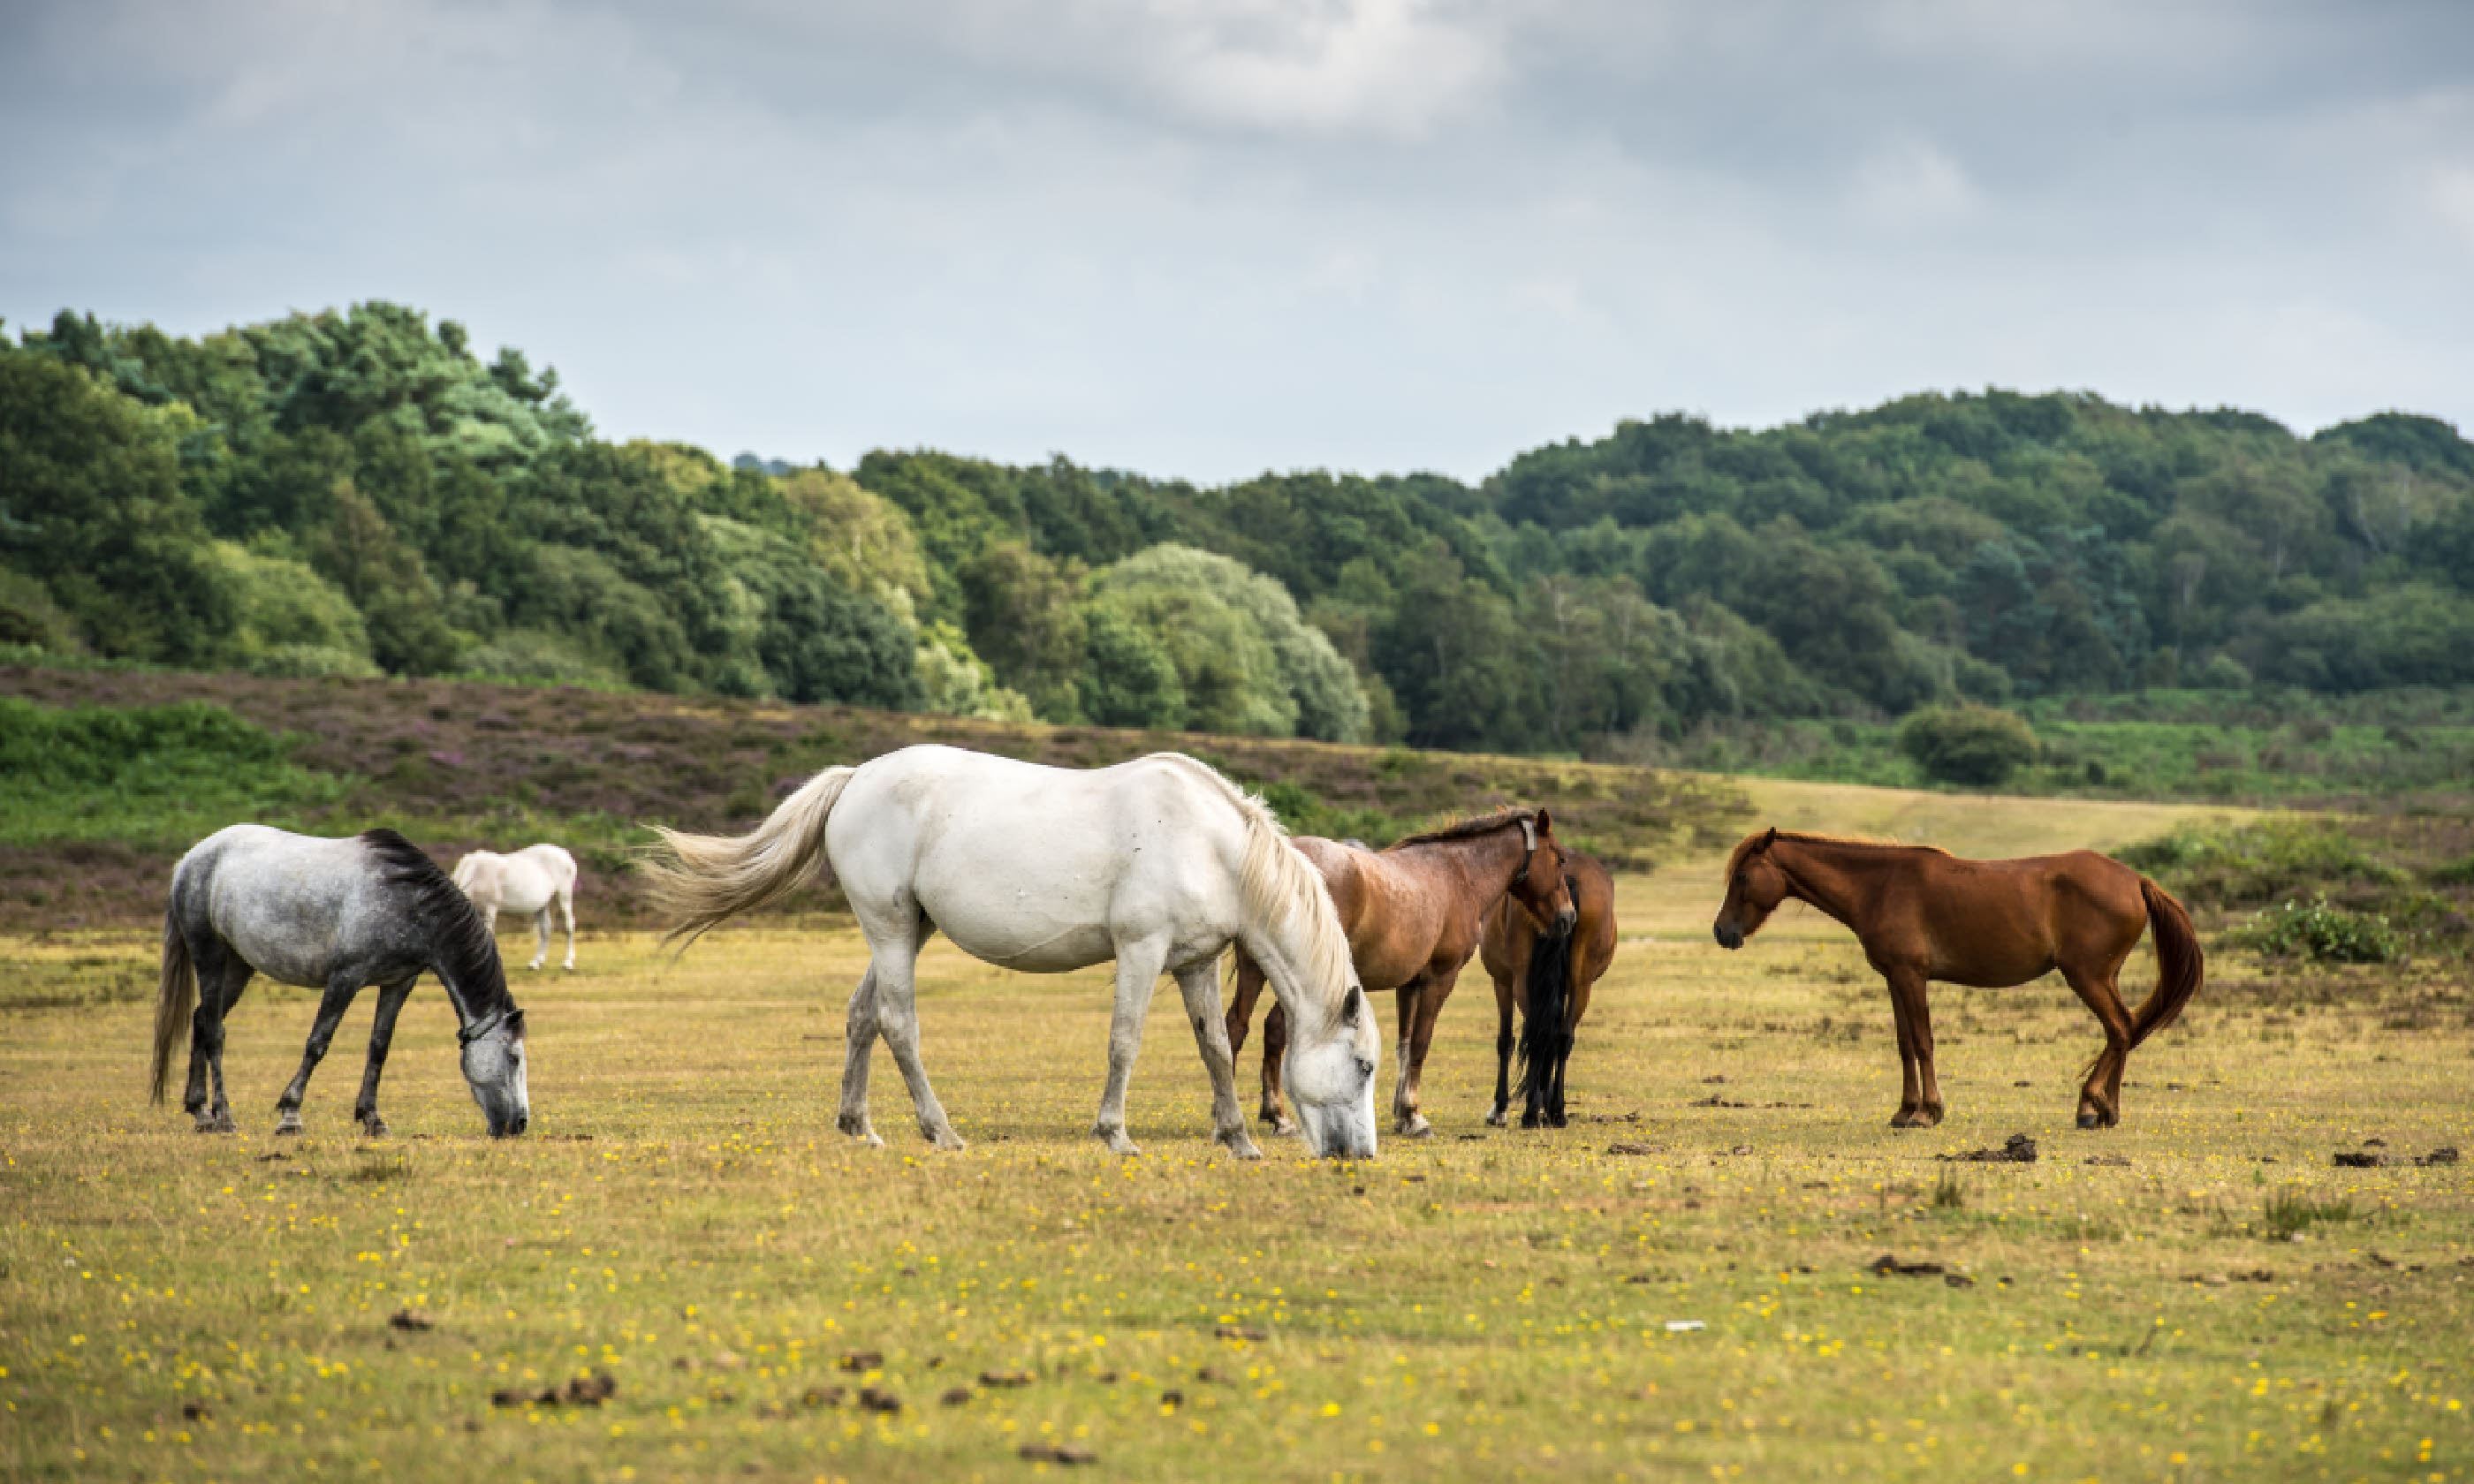 Ponies in New Forest (Shutterstock)